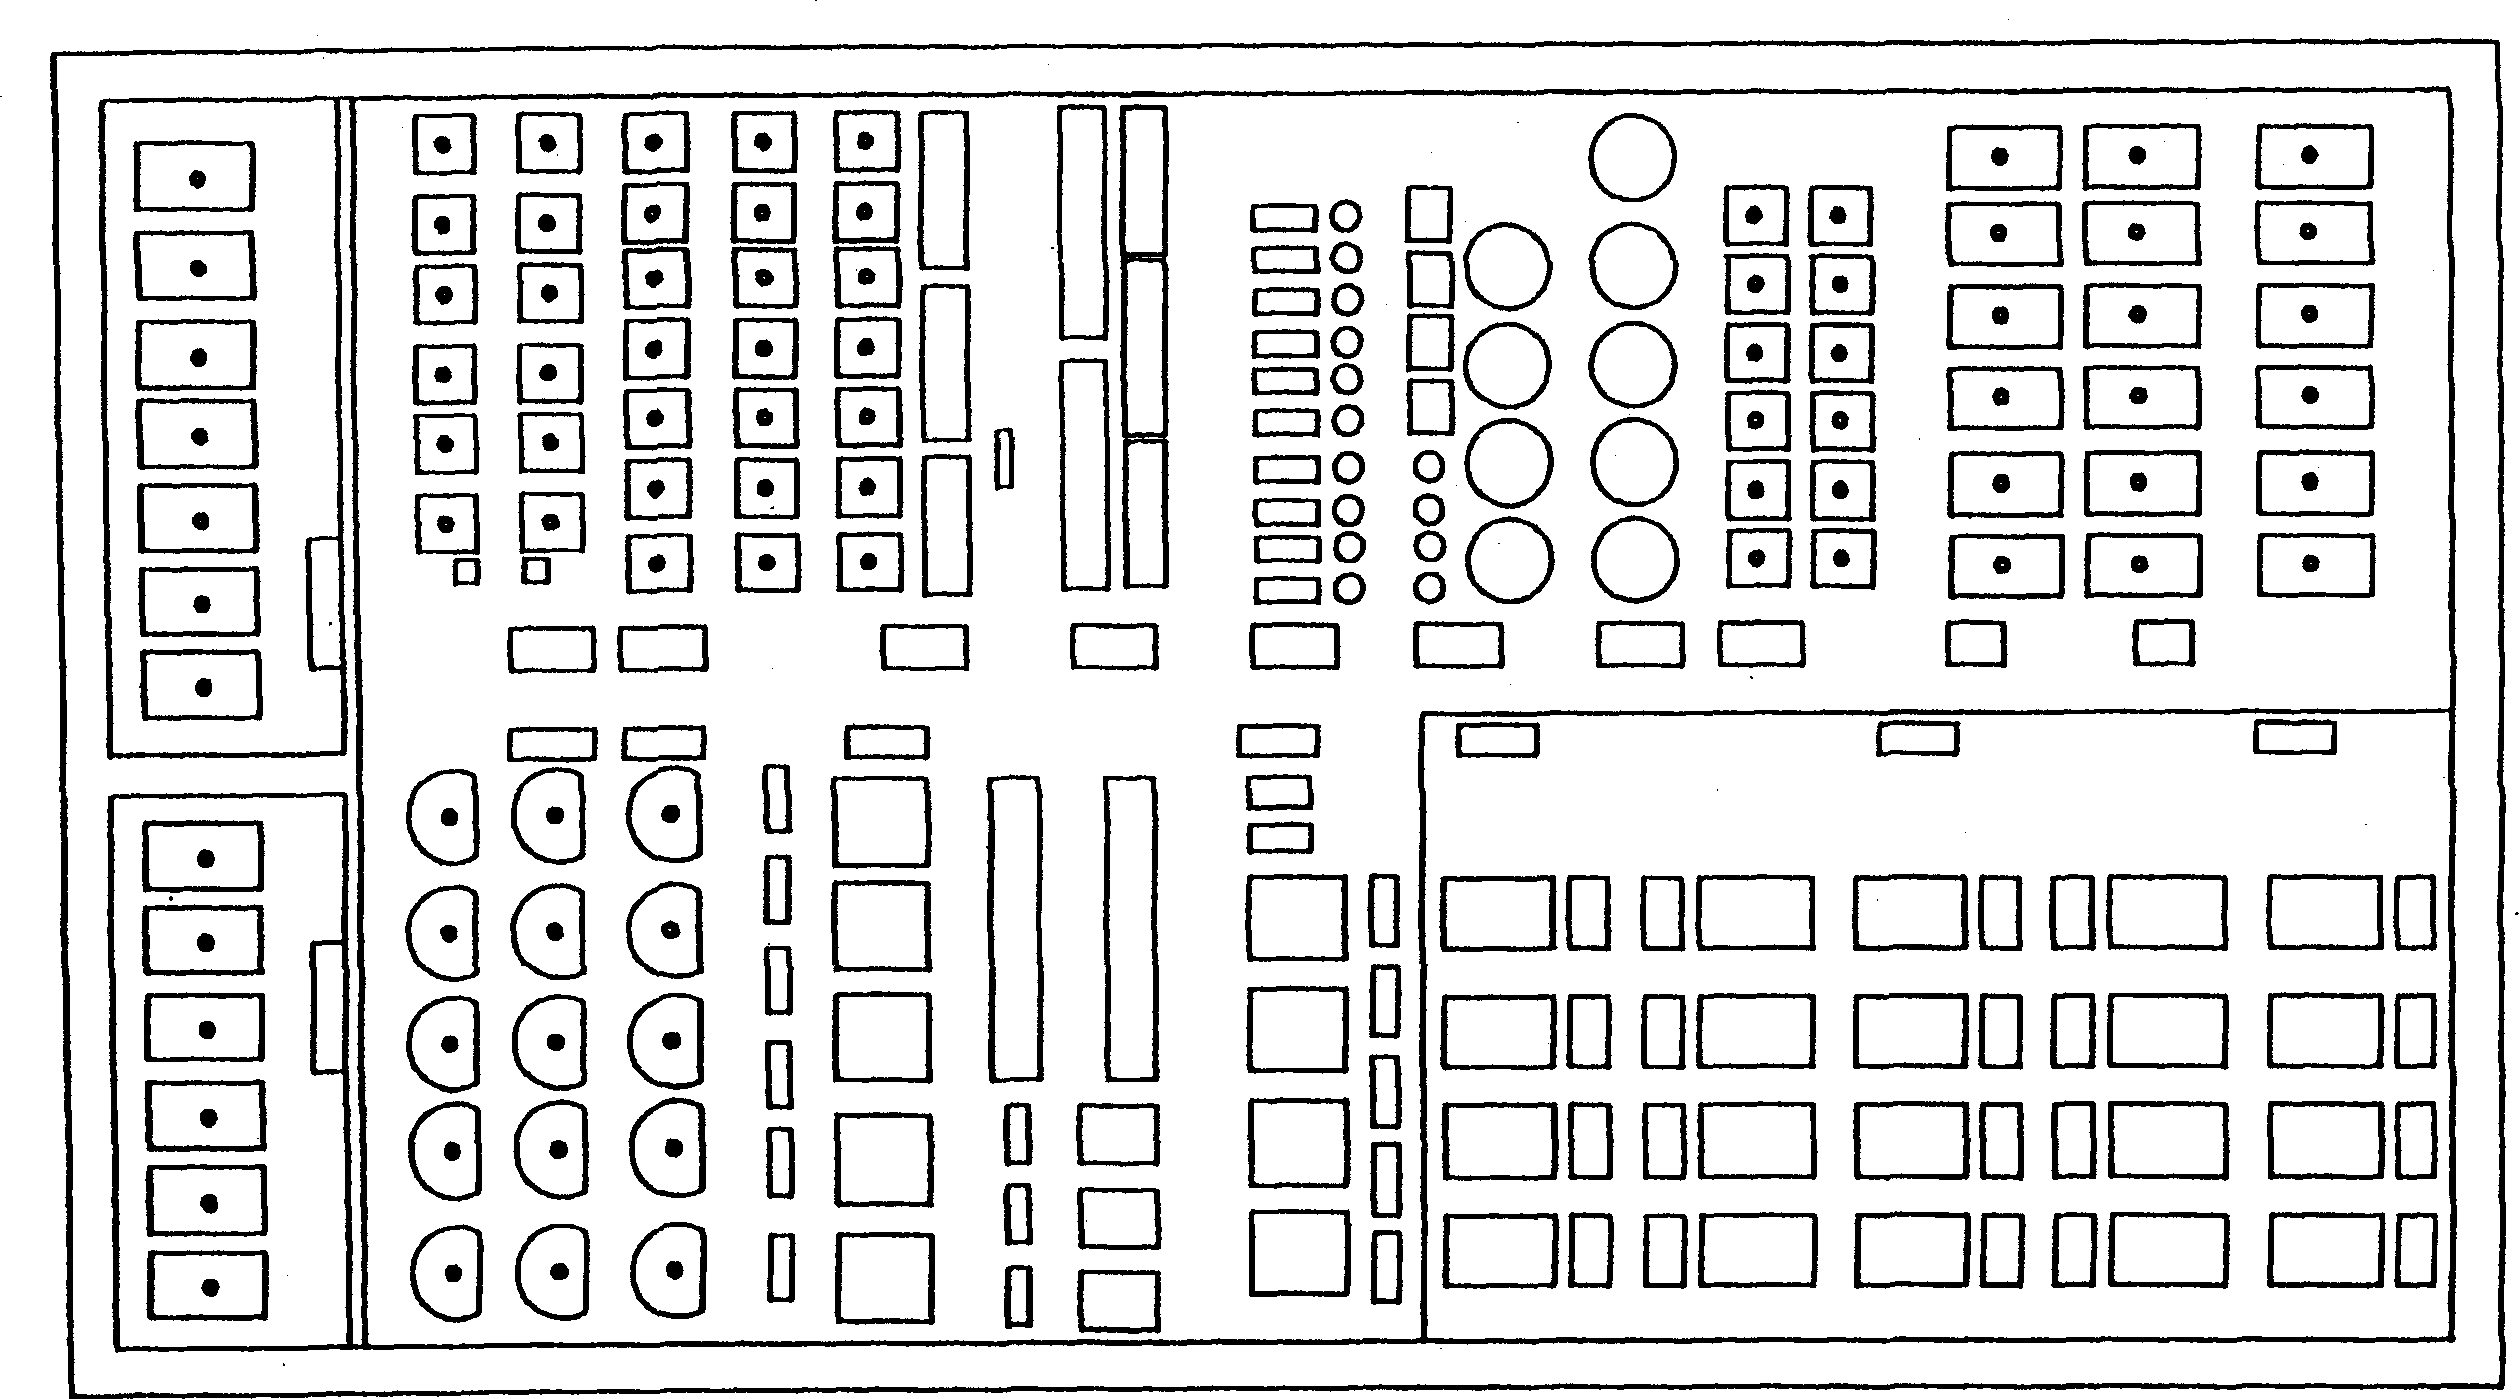 Semi-conductor manufacturing factory layout